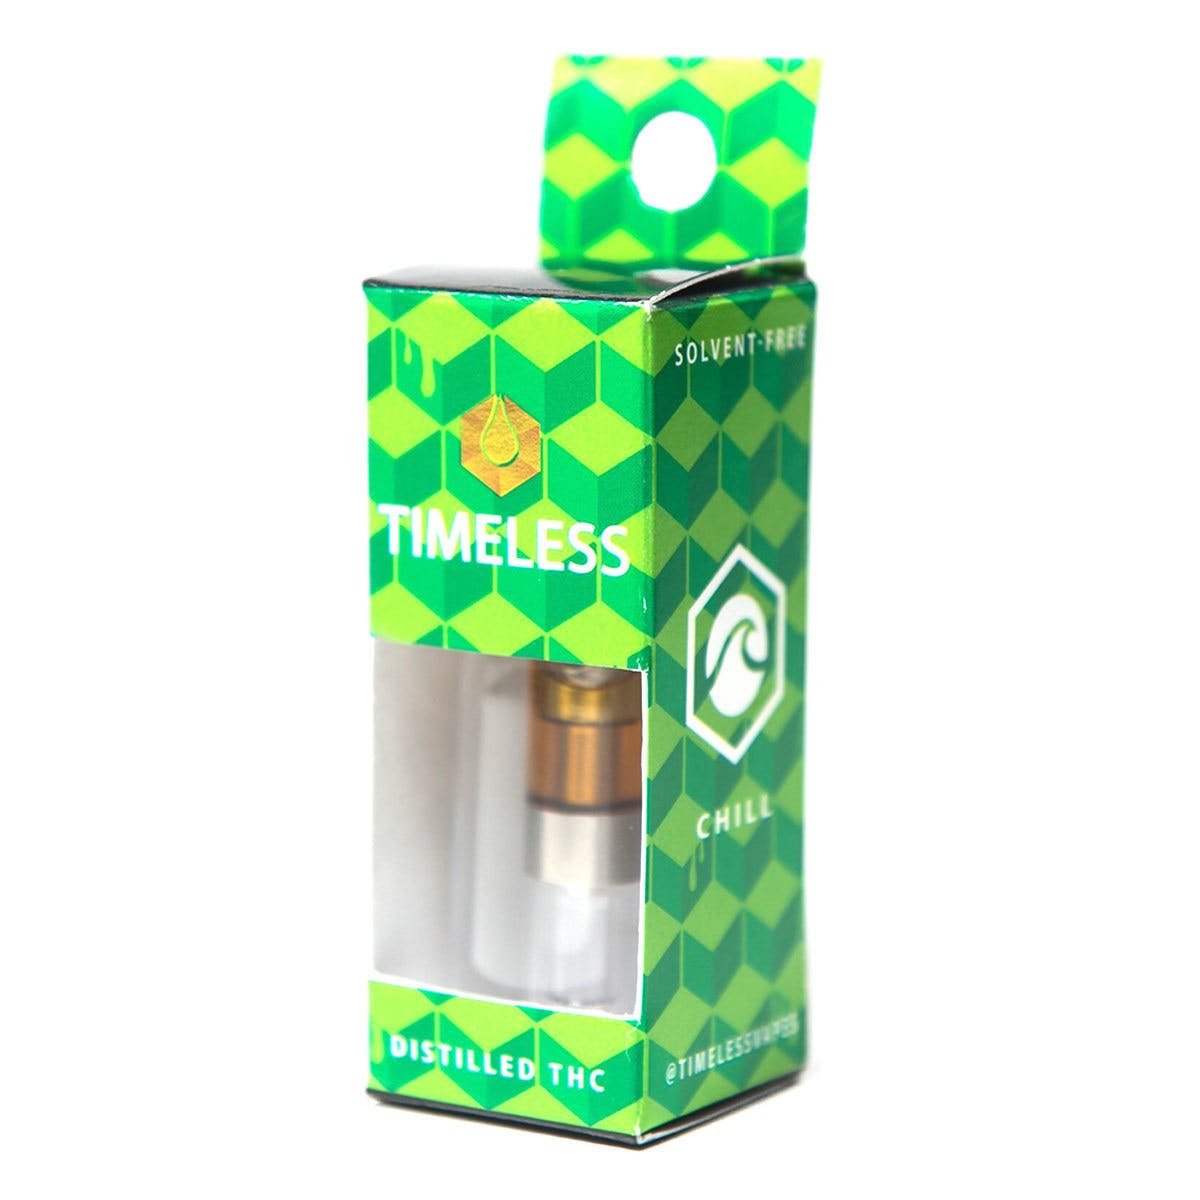 concentrate-timeless-vapes-1000mg-zkittles-vape-cartridge-chill